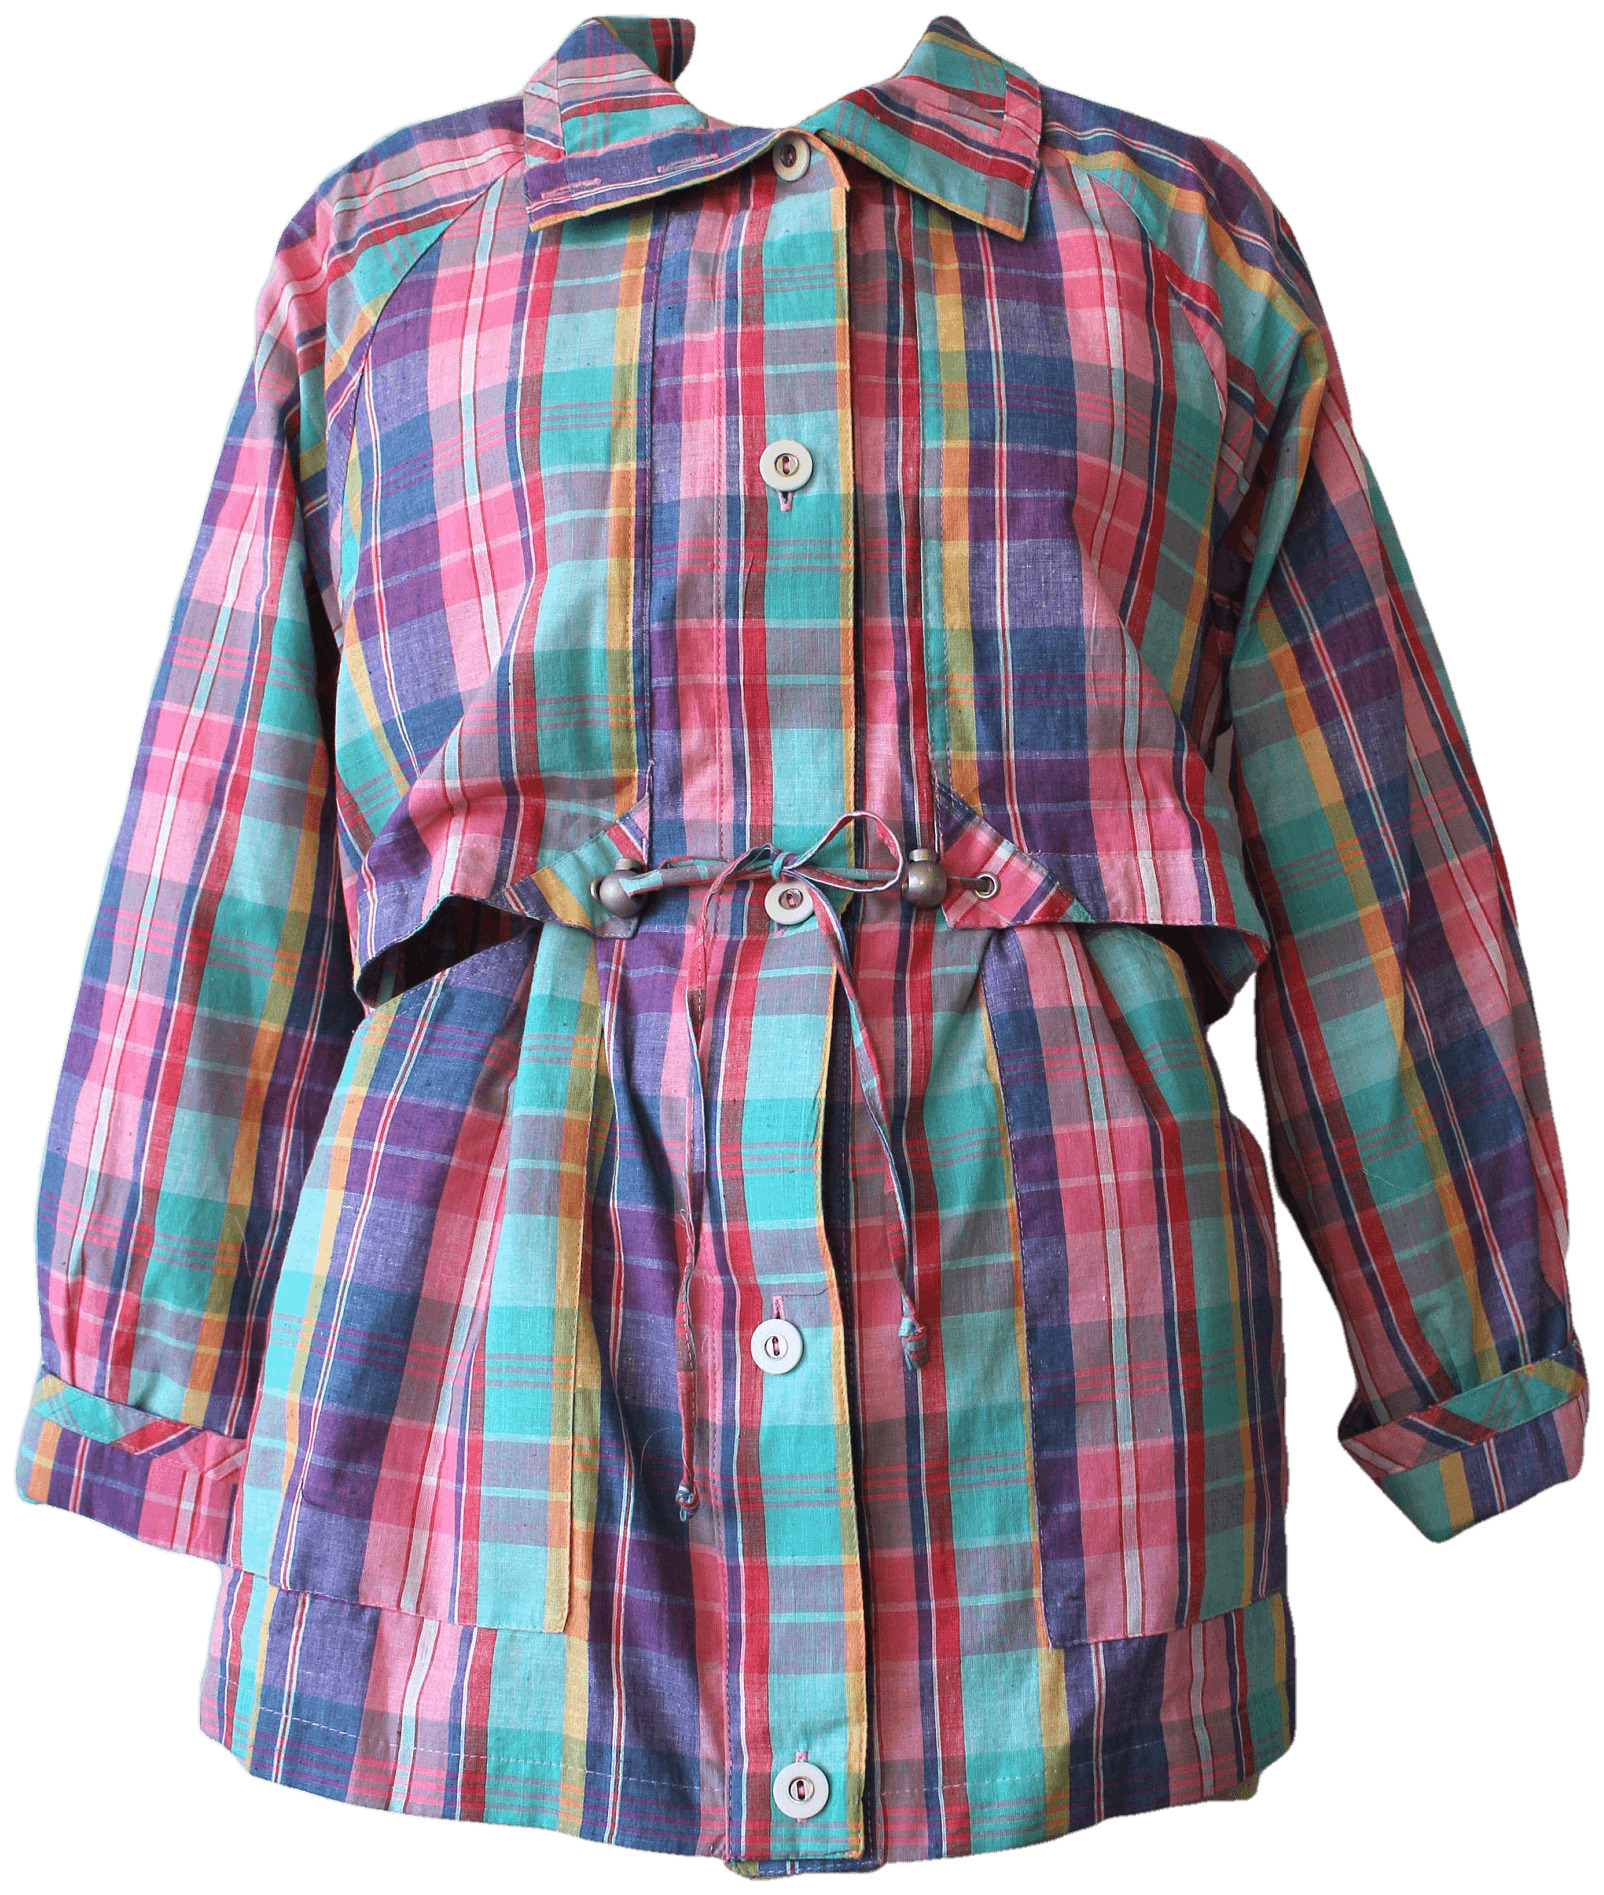 vintage-80-s-pastel-blue-and-pink-plaid-jacket-by-current-seen-shop